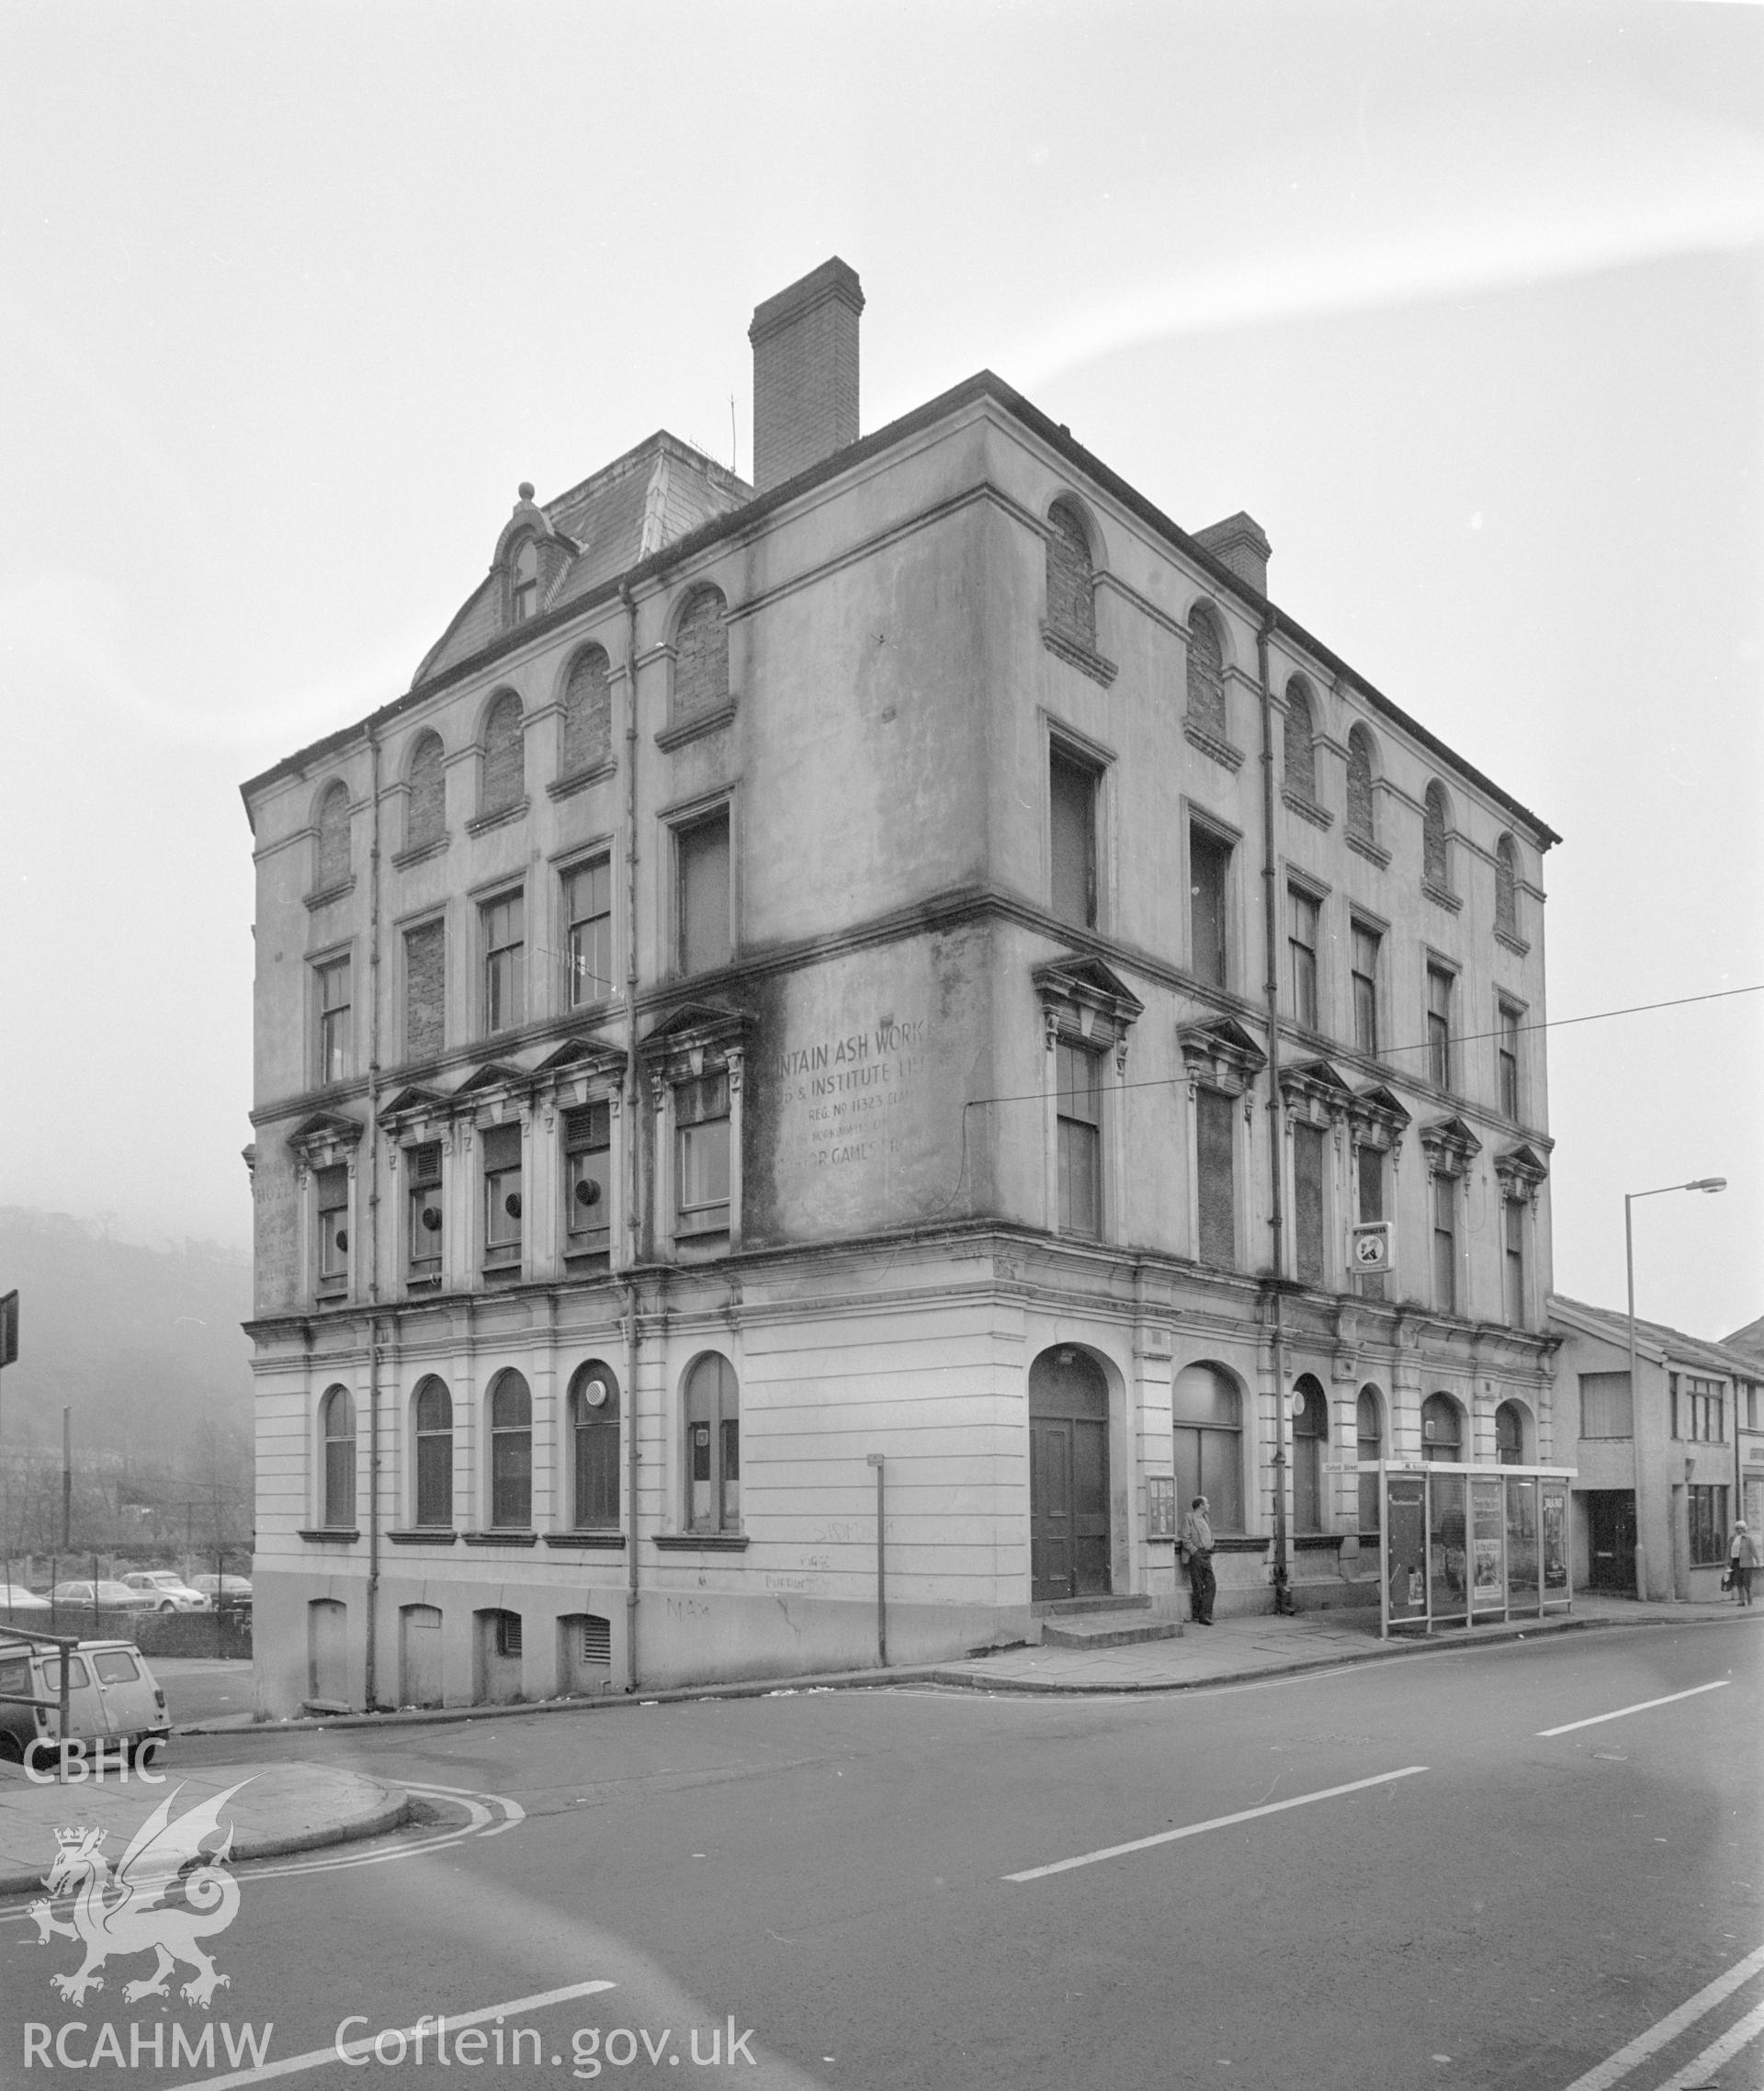 Digital copy of a black and white photograph showing an exterior view of the Grand Hotel, Mountain Ash.